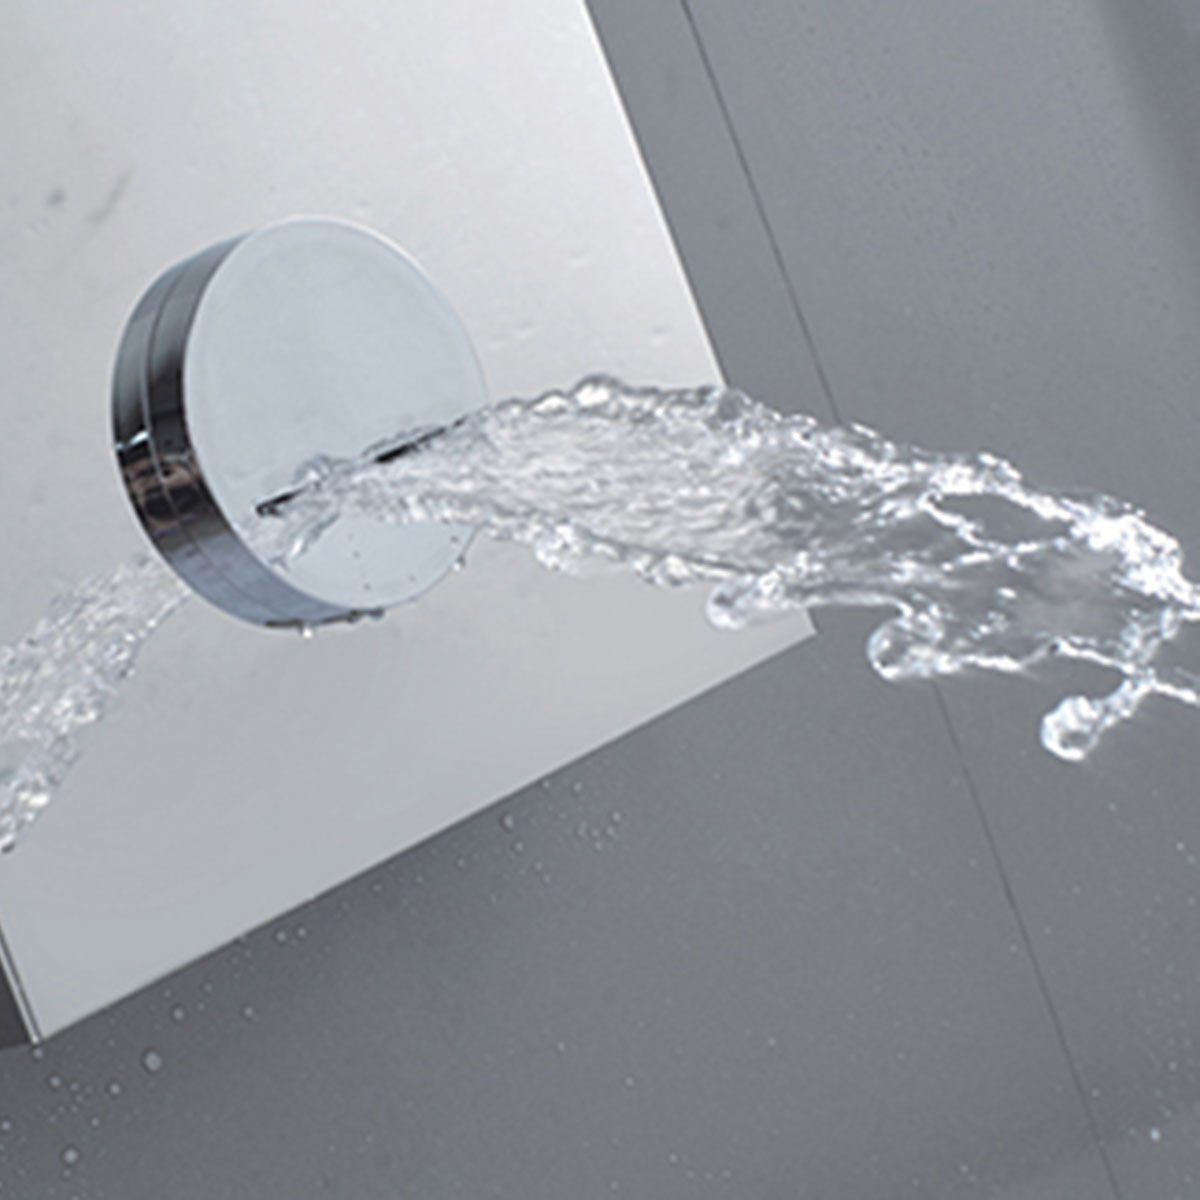 SP-5539 Stainless Steel Shower Panel (Chrome) - iStyle Bath